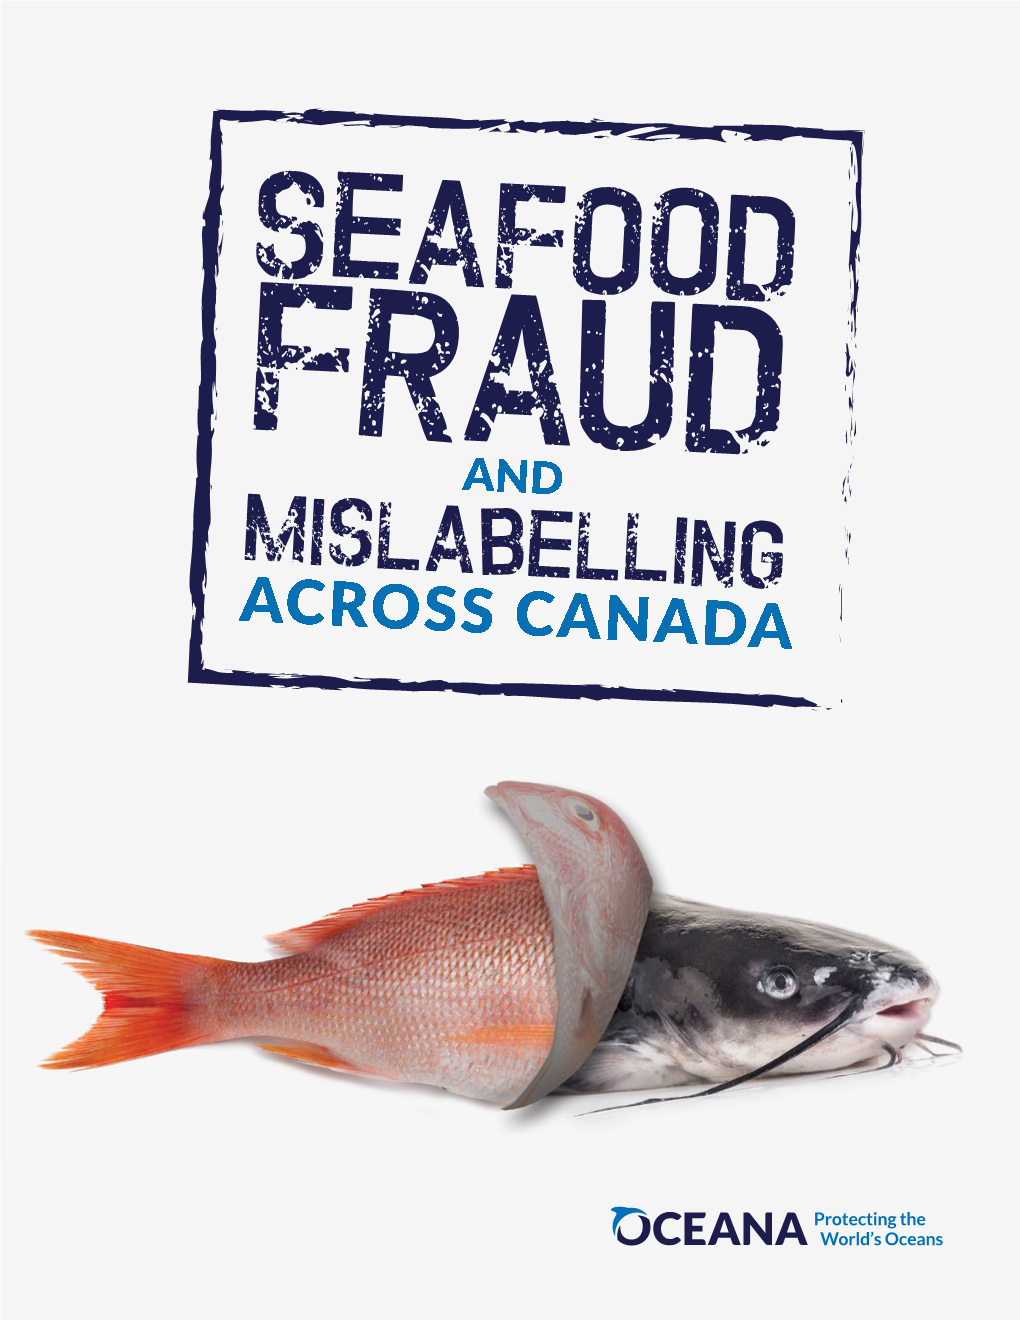 TESTED for SEAFOOD FRAUD in Five Cities Across Canada and Found Widespread Mislabelling